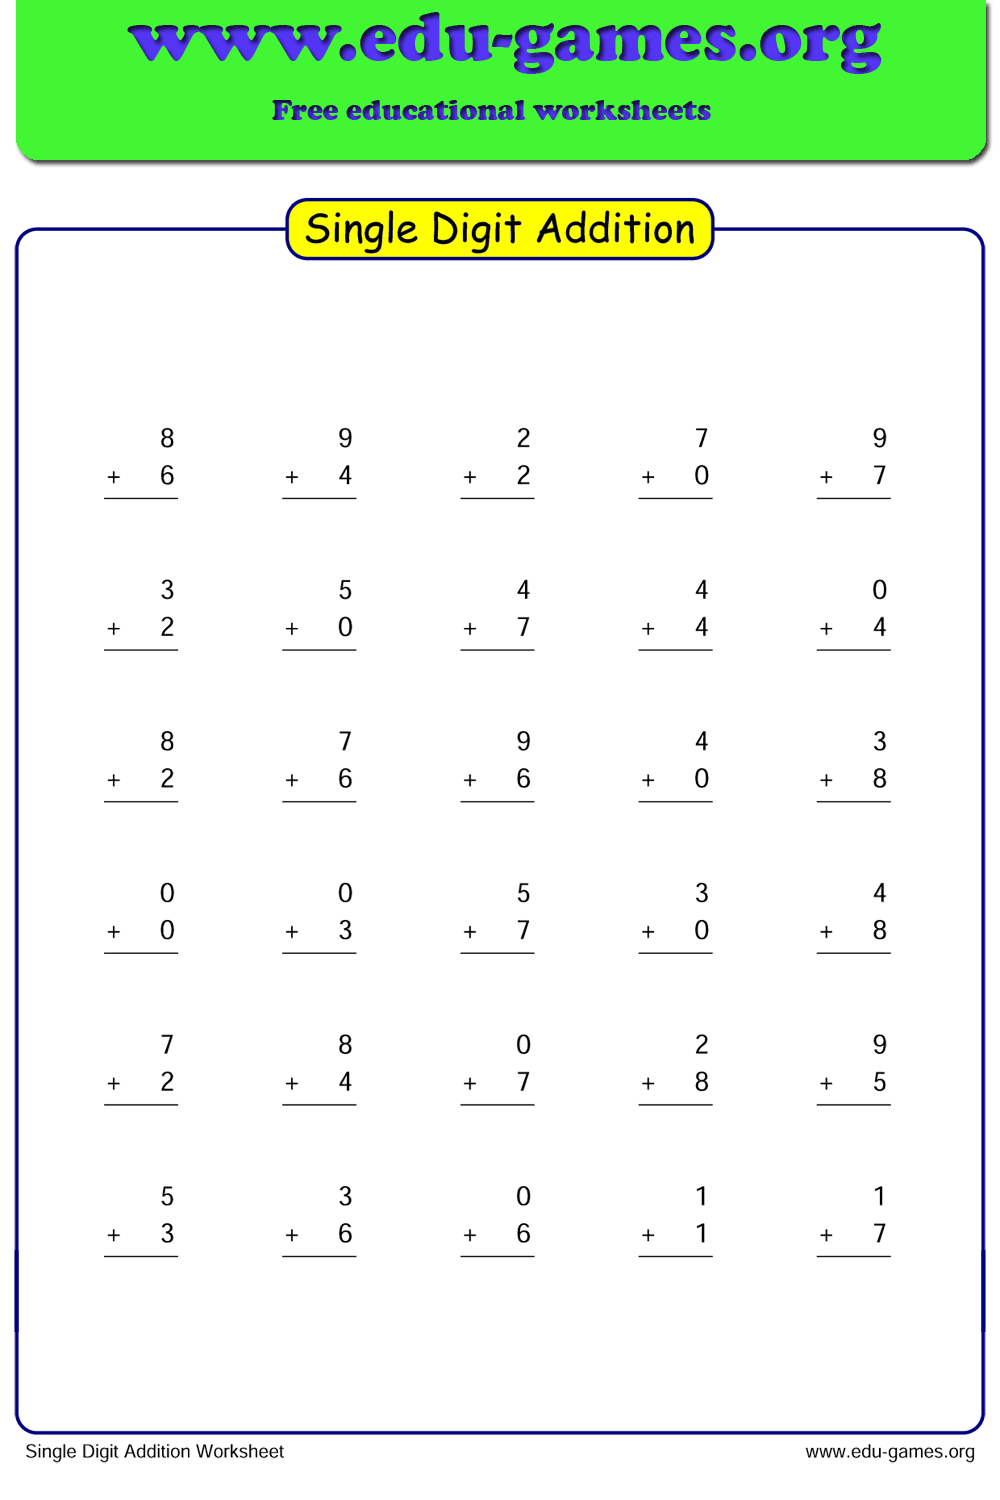 Single digit addition png